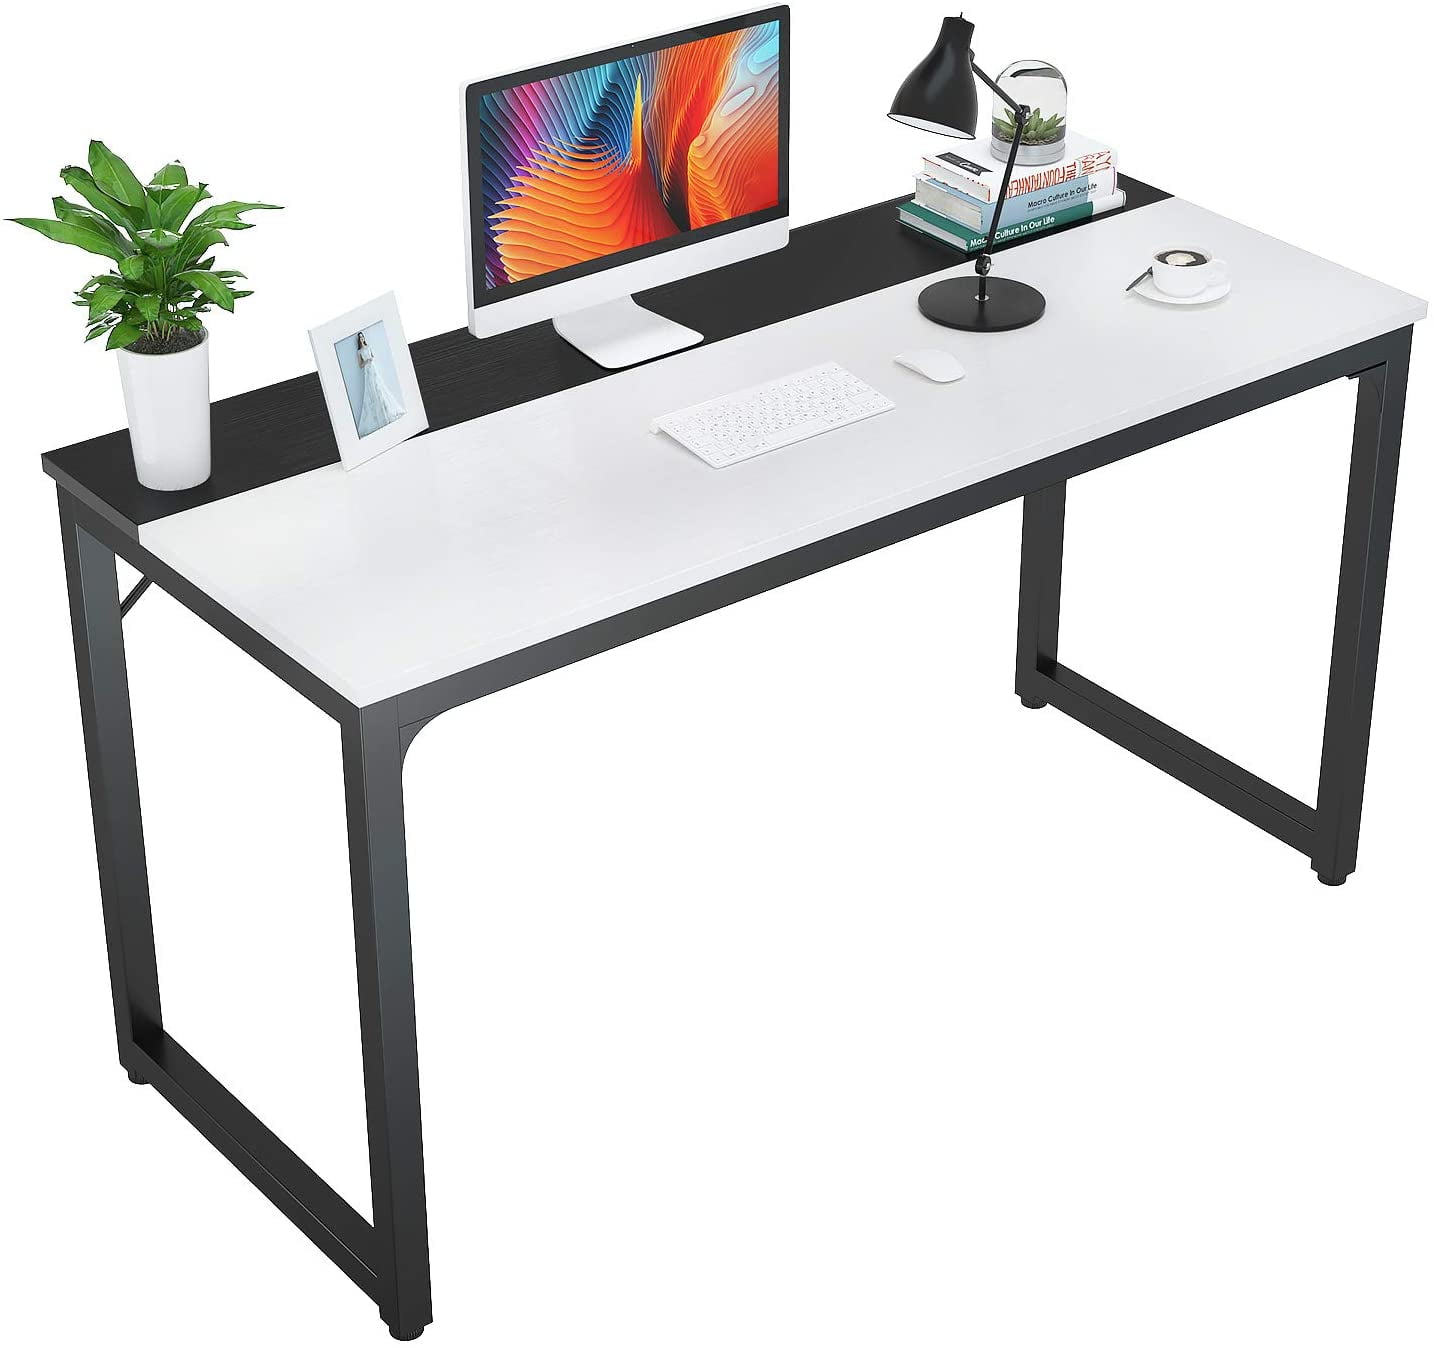 Home Office Famgizmo 120 X 60 X 75cm Computer PC Laptop Gaming Desk Study Writing Table Workstation Black